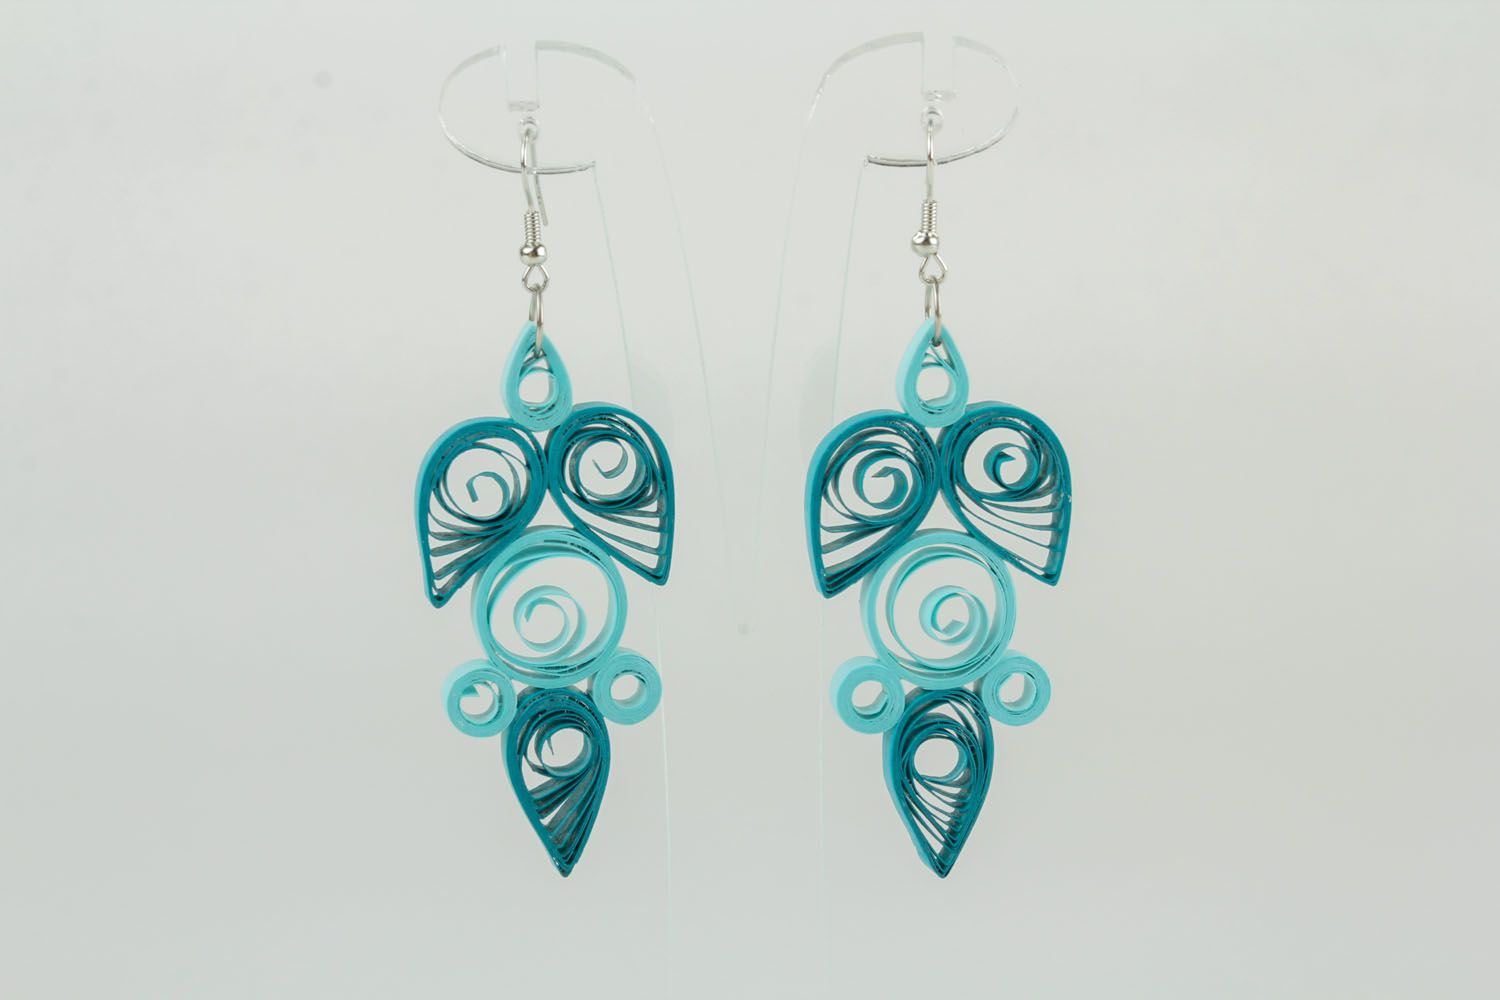 Large earrings made using quilling technique photo 2